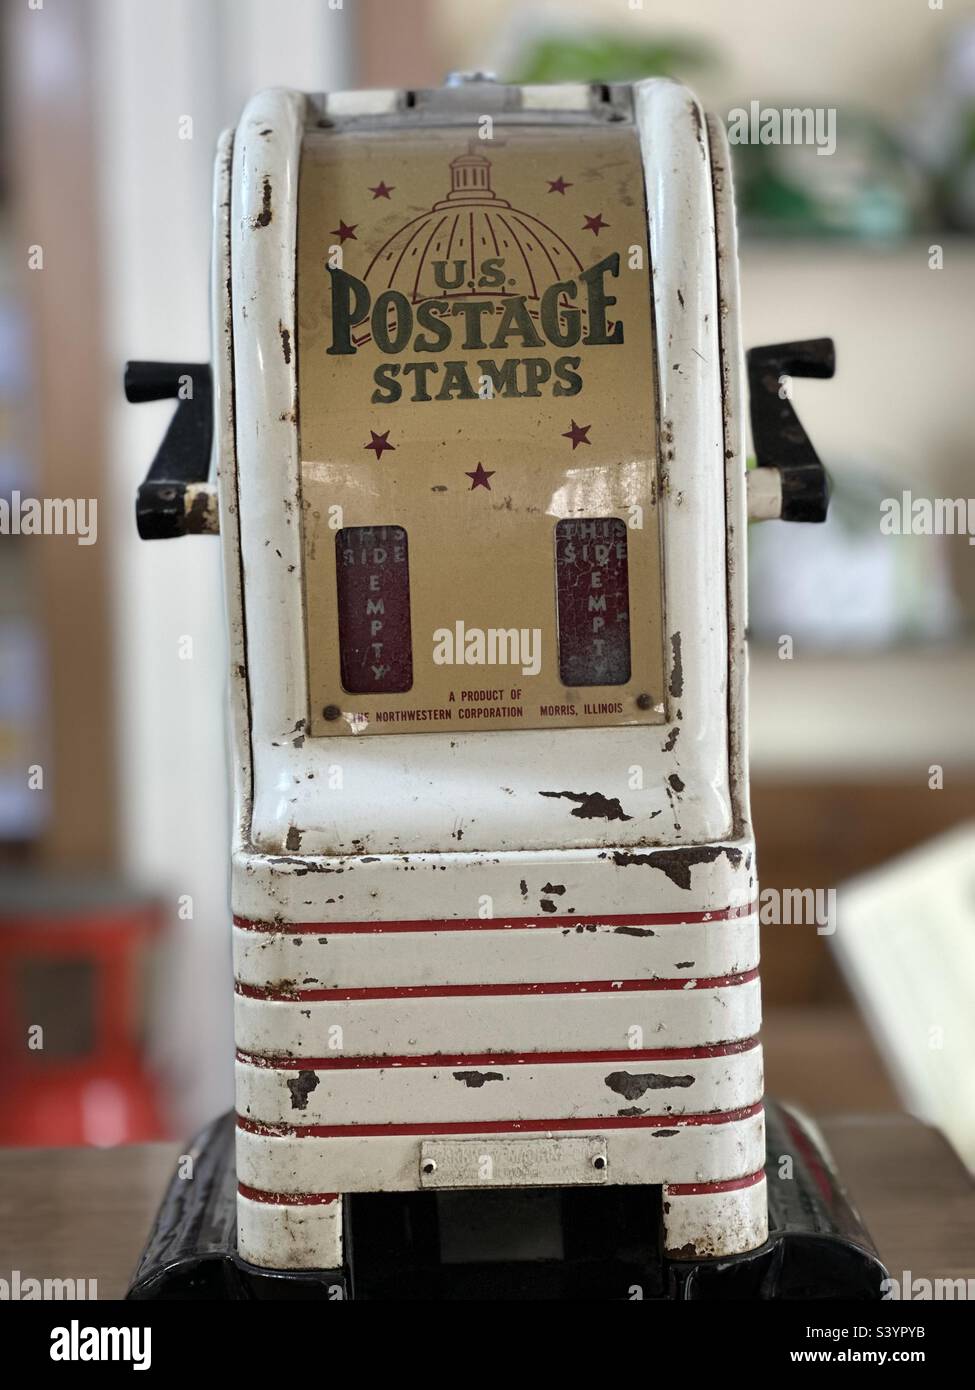 100 Roll Postage Stamp Dispenser (Stamps Not Included)